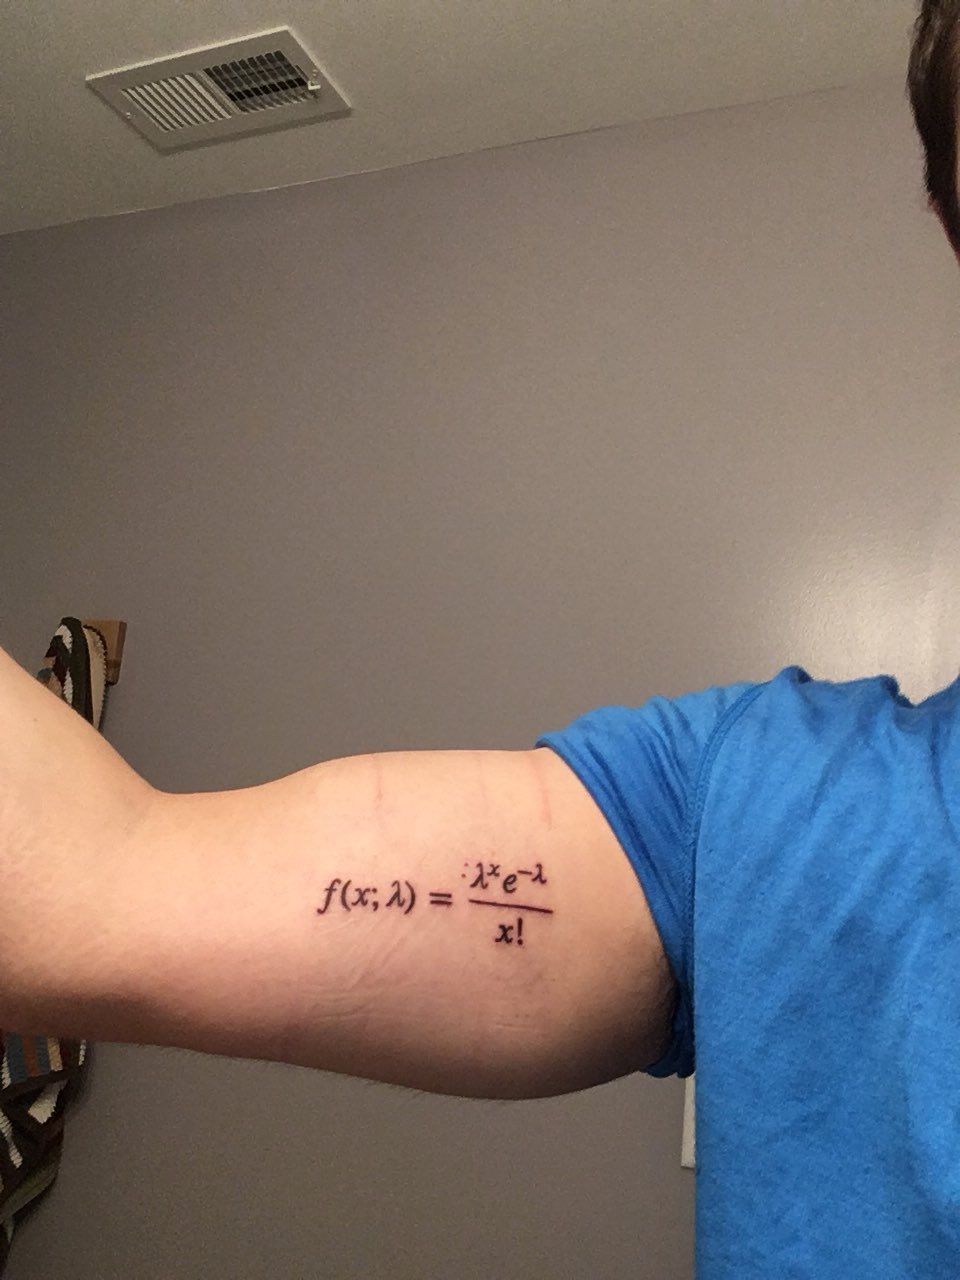 EigenGender on Twitter Ive had a Bayes theorem tattoo on my arm for a  while and Im looking to supplement it with a lot more equation tattoos  Ive got a list of